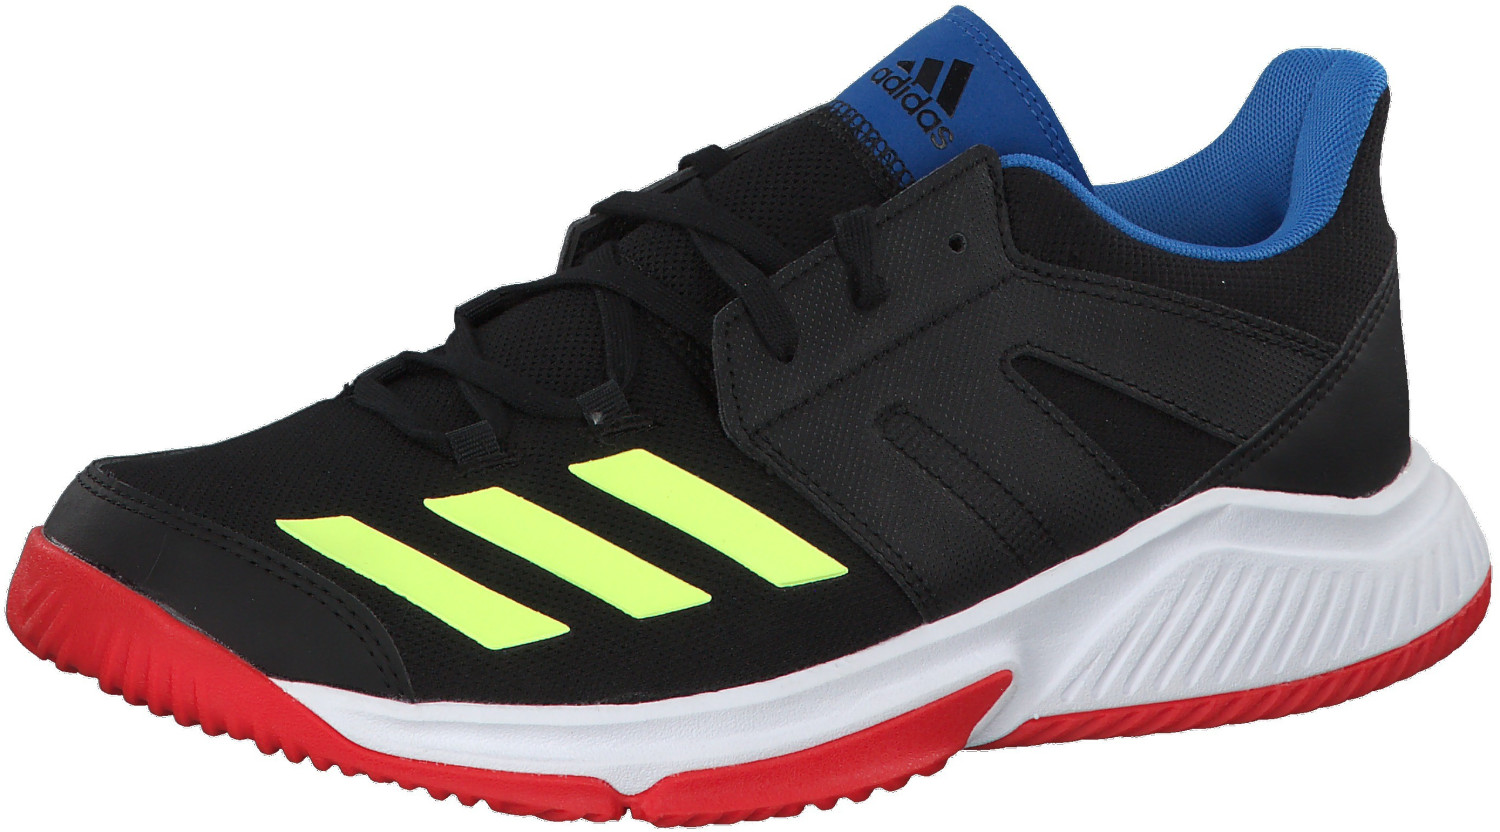 Adidas Stabil Essence core black/hi-res yellow/active red